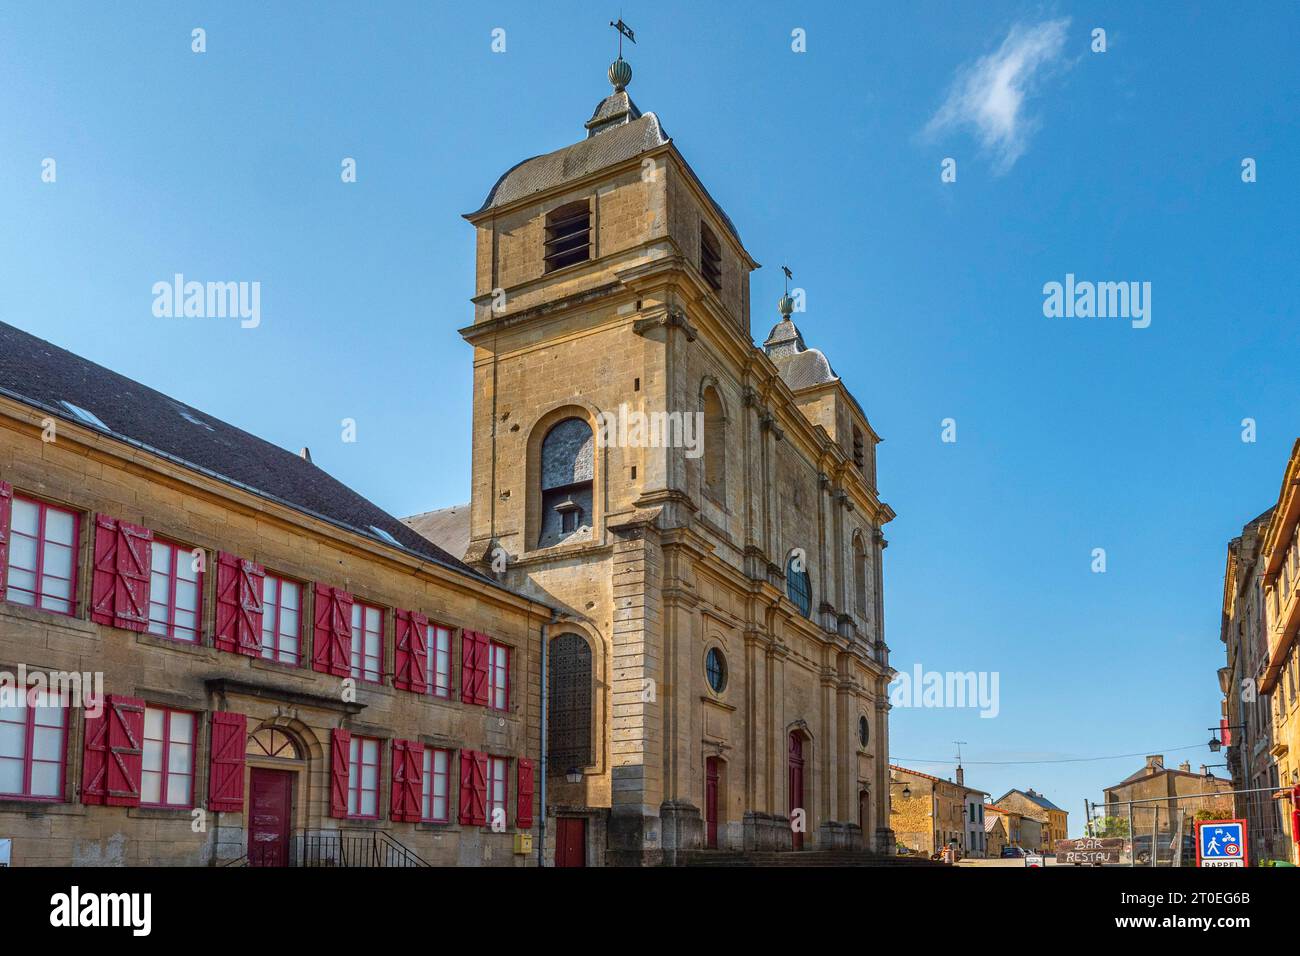 Church in the Citadel of Montmedy, Departement Meuse, Region Grand Est, France Stock Photo